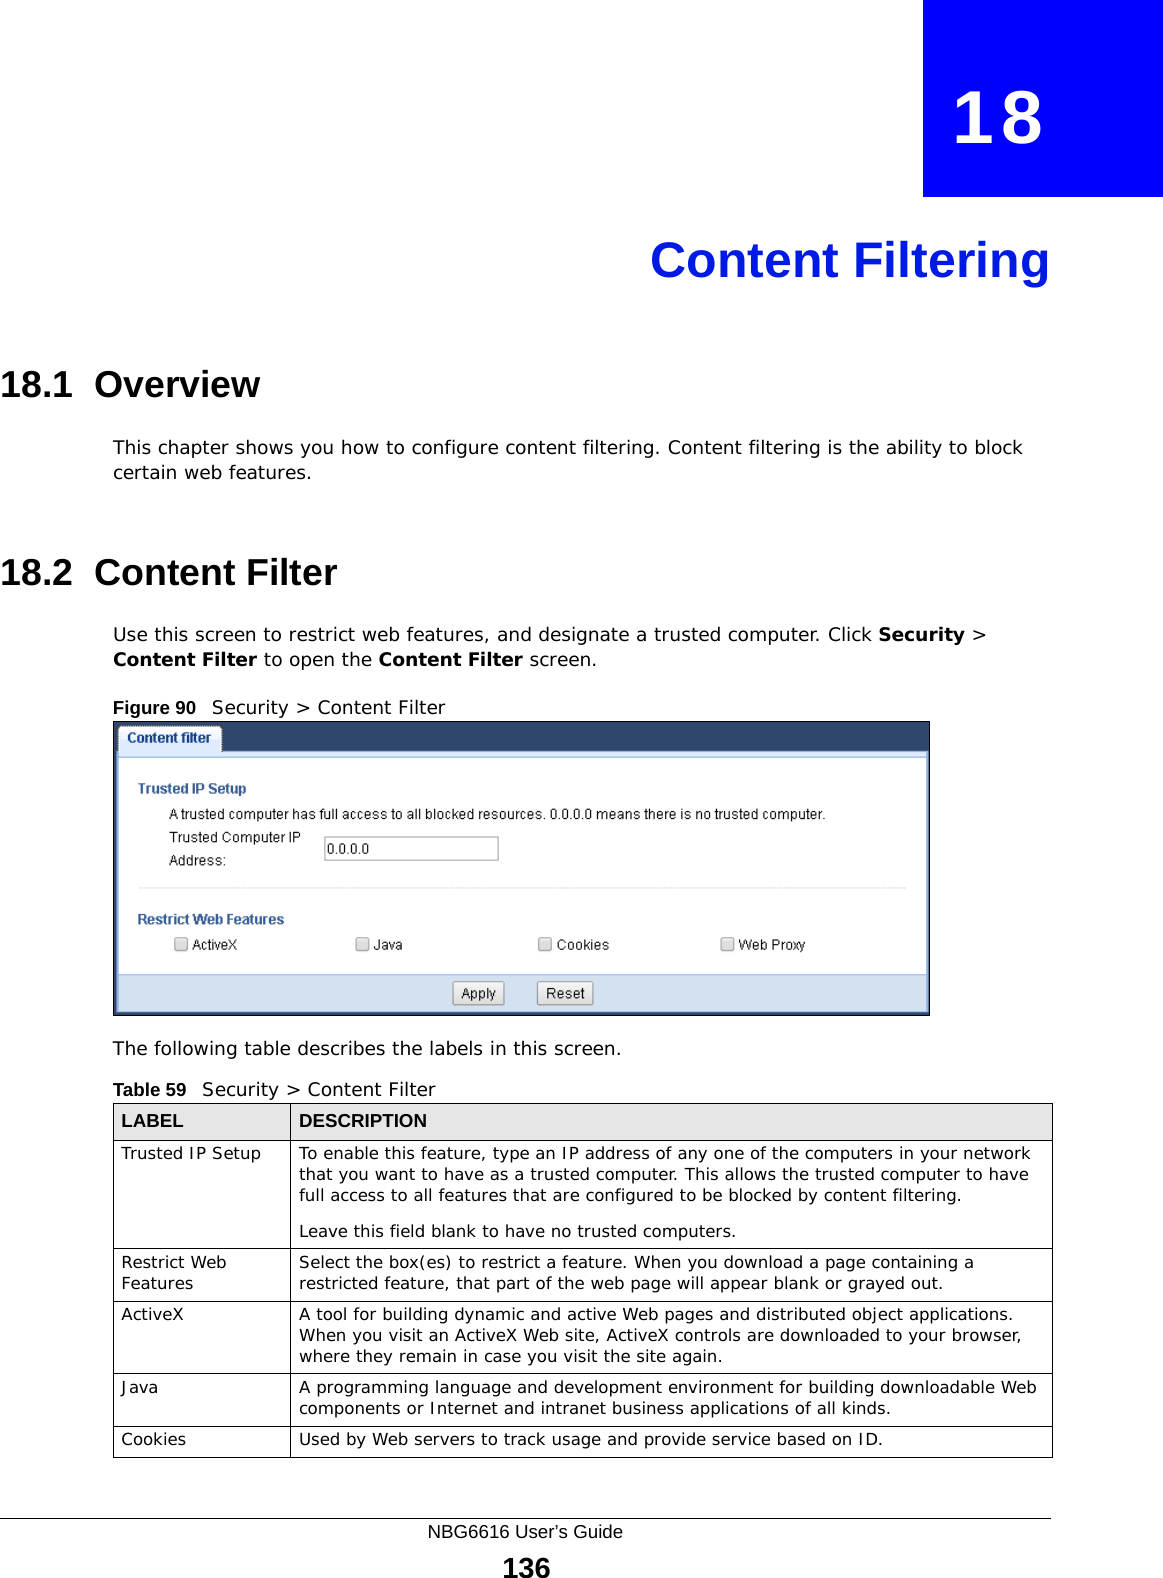 NBG6616 User’s Guide136CHAPTER   18Content Filtering18.1  OverviewThis chapter shows you how to configure content filtering. Content filtering is the ability to block certain web features.18.2  Content FilterUse this screen to restrict web features, and designate a trusted computer. Click Security &gt; Content Filter to open the Content Filter screen. Figure 90   Security &gt; Content Filter The following table describes the labels in this screen.Table 59   Security &gt; Content Filter LABEL DESCRIPTIONTrusted IP Setup To enable this feature, type an IP address of any one of the computers in your network that you want to have as a trusted computer. This allows the trusted computer to have full access to all features that are configured to be blocked by content filtering.Leave this field blank to have no trusted computers.Restrict Web Features Select the box(es) to restrict a feature. When you download a page containing a restricted feature, that part of the web page will appear blank or grayed out.ActiveX  A tool for building dynamic and active Web pages and distributed object applications. When you visit an ActiveX Web site, ActiveX controls are downloaded to your browser, where they remain in case you visit the site again. Java A programming language and development environment for building downloadable Web components or Internet and intranet business applications of all kinds.Cookies Used by Web servers to track usage and provide service based on ID. 